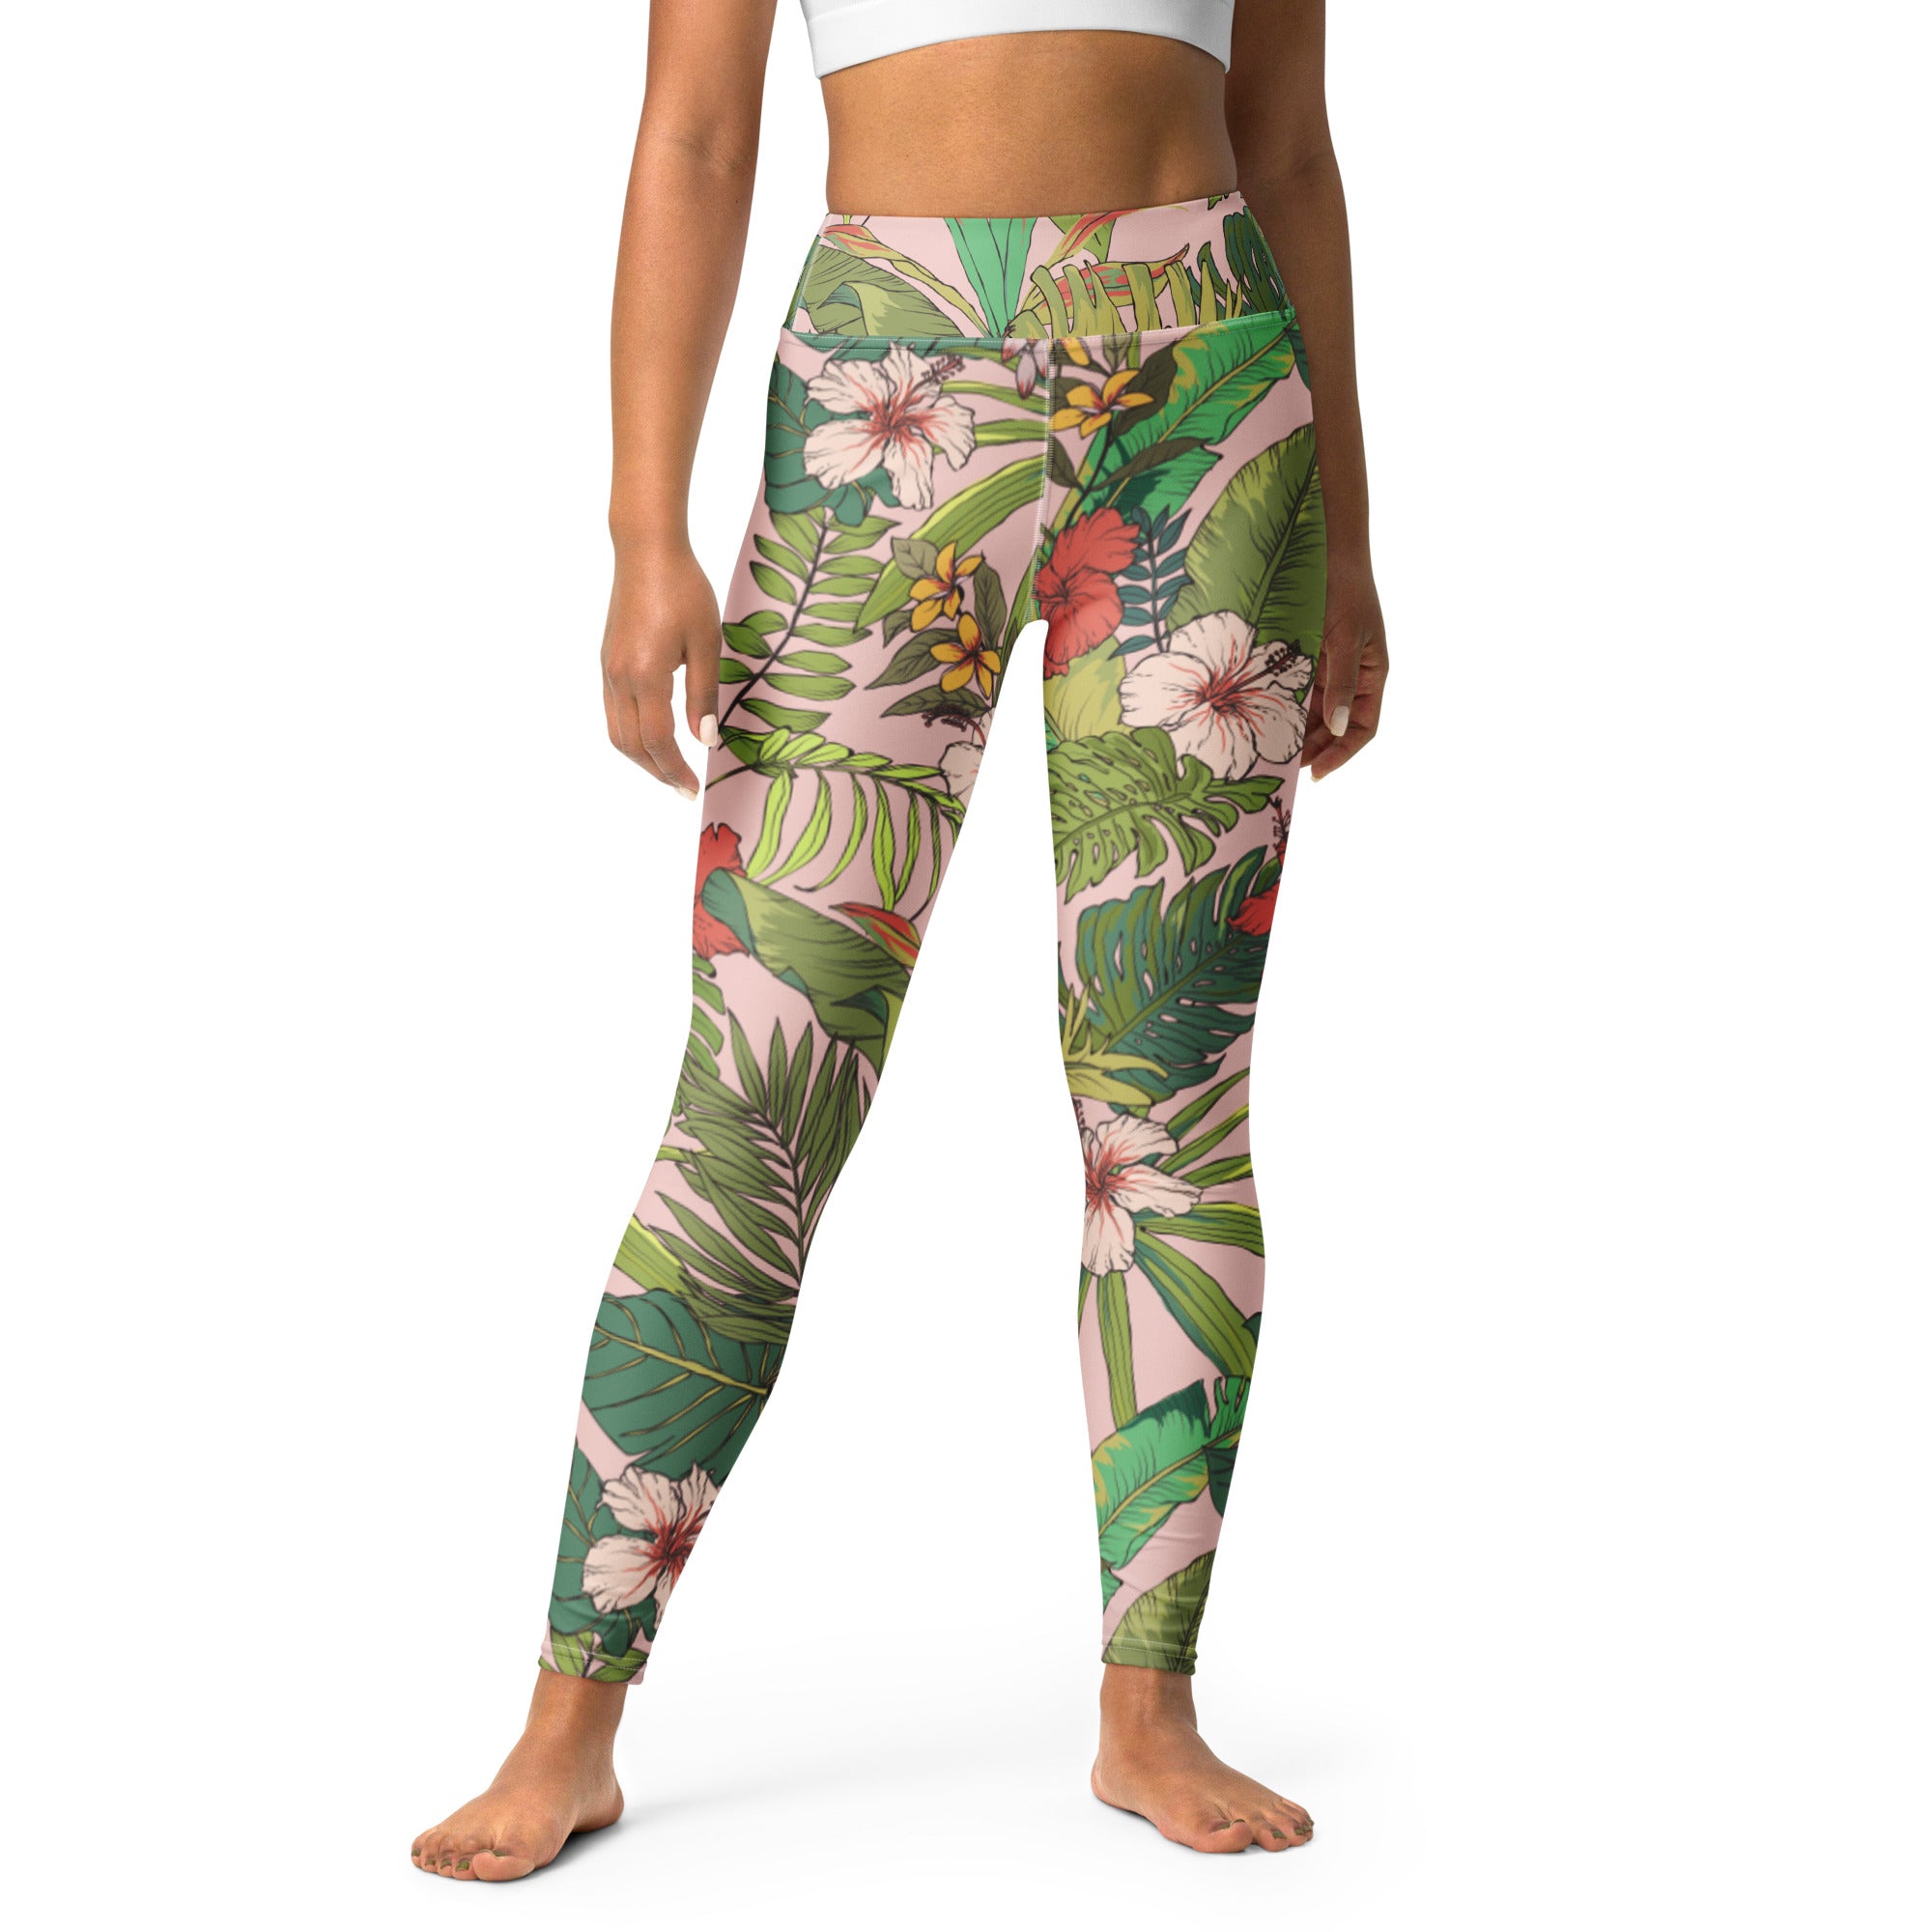 Tropical Leggings, Cool Floral Legging, Aesthetic Graphic, Trendy Flower  Print, Activewear for Women, Running Yoga Pant, Gym Workout Clothes 